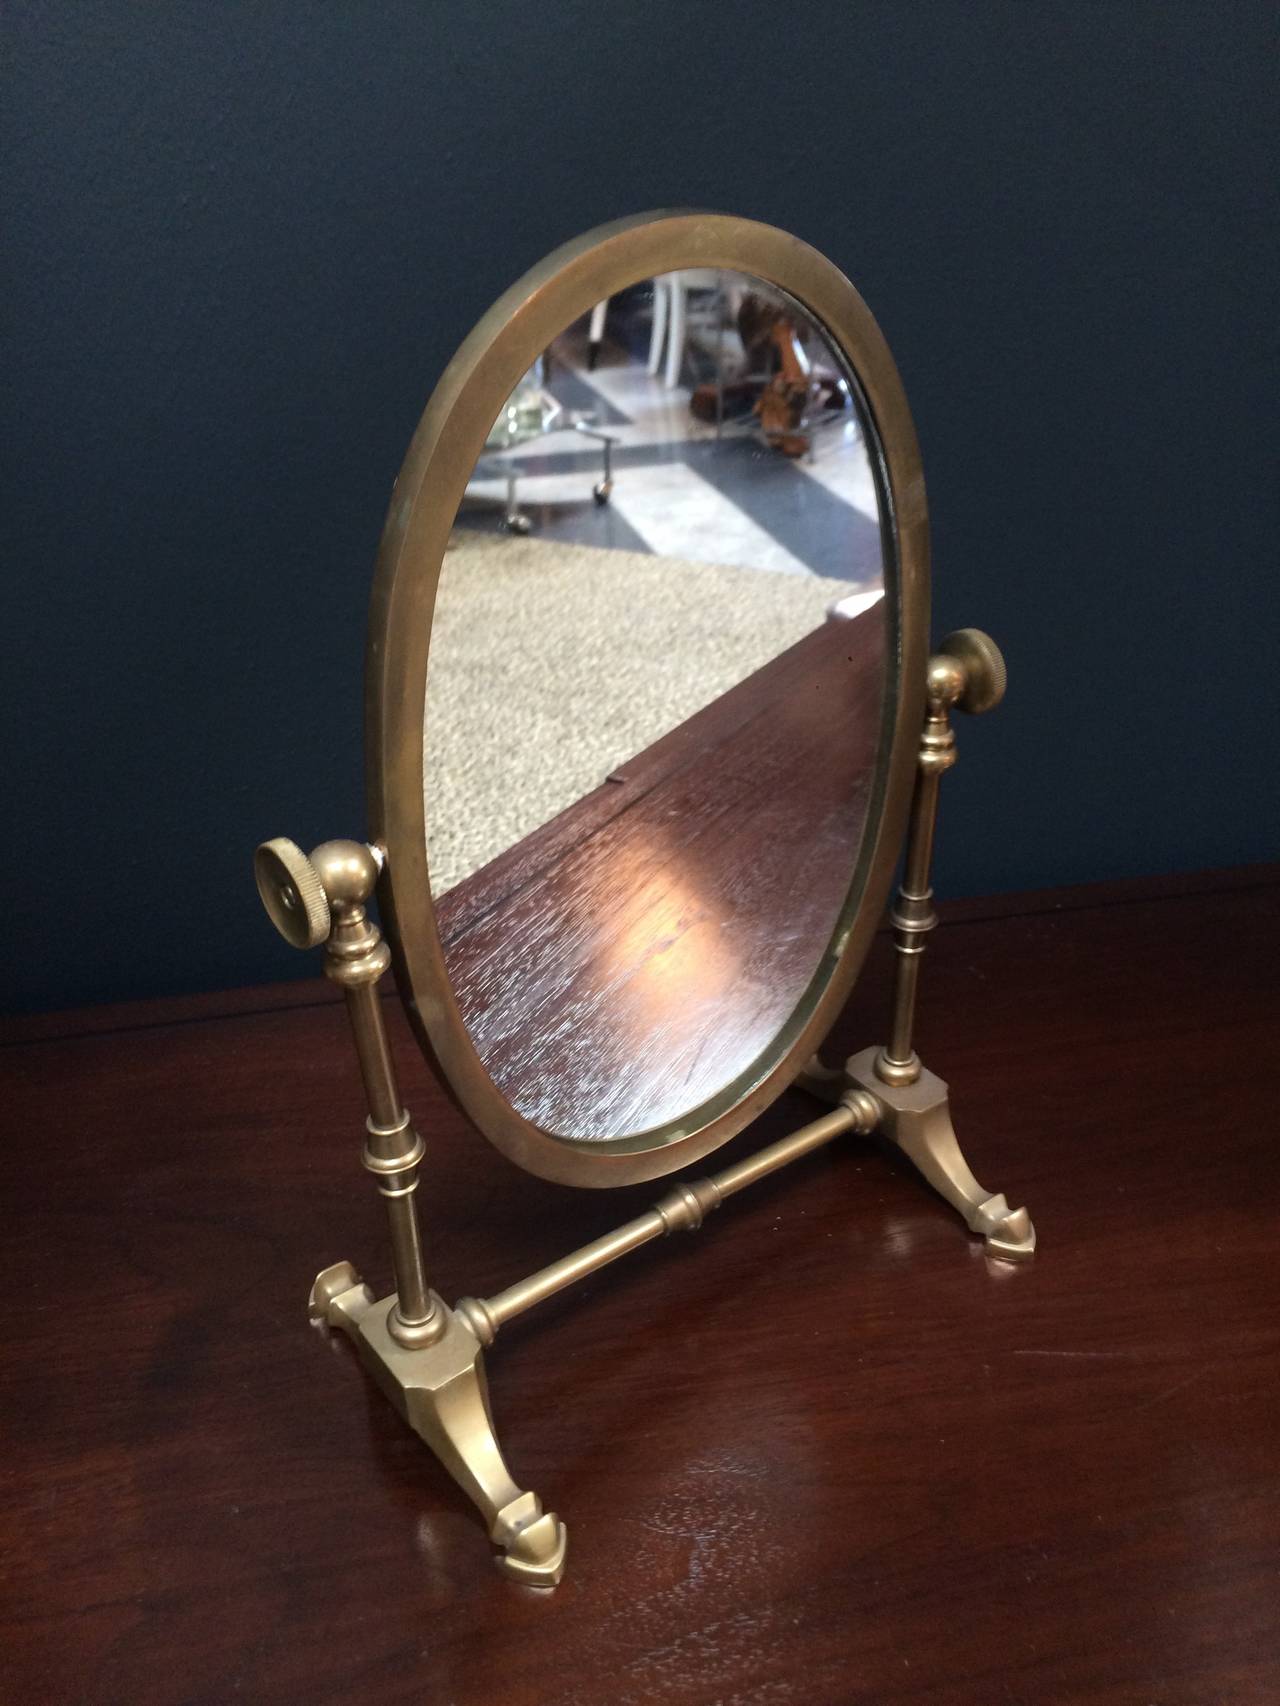 Lovely mirror on the smaller side for a mens dressing table - Industrial look to the brass base and fittings.